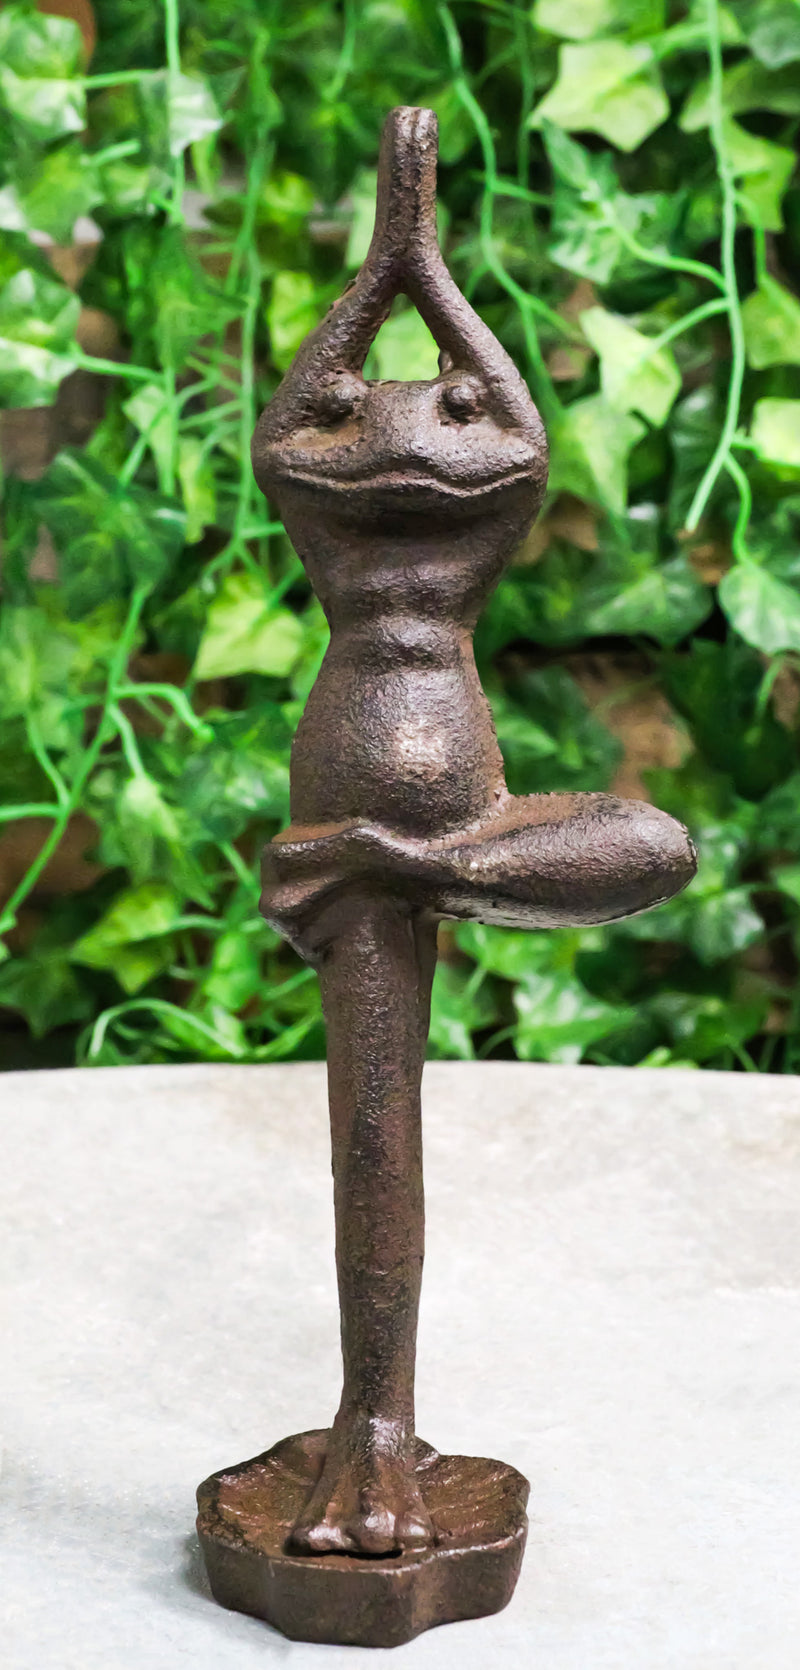 Rustic Cast Iron Whimsical Meditation Yoga Toad Frog In Tree Pose Figurine